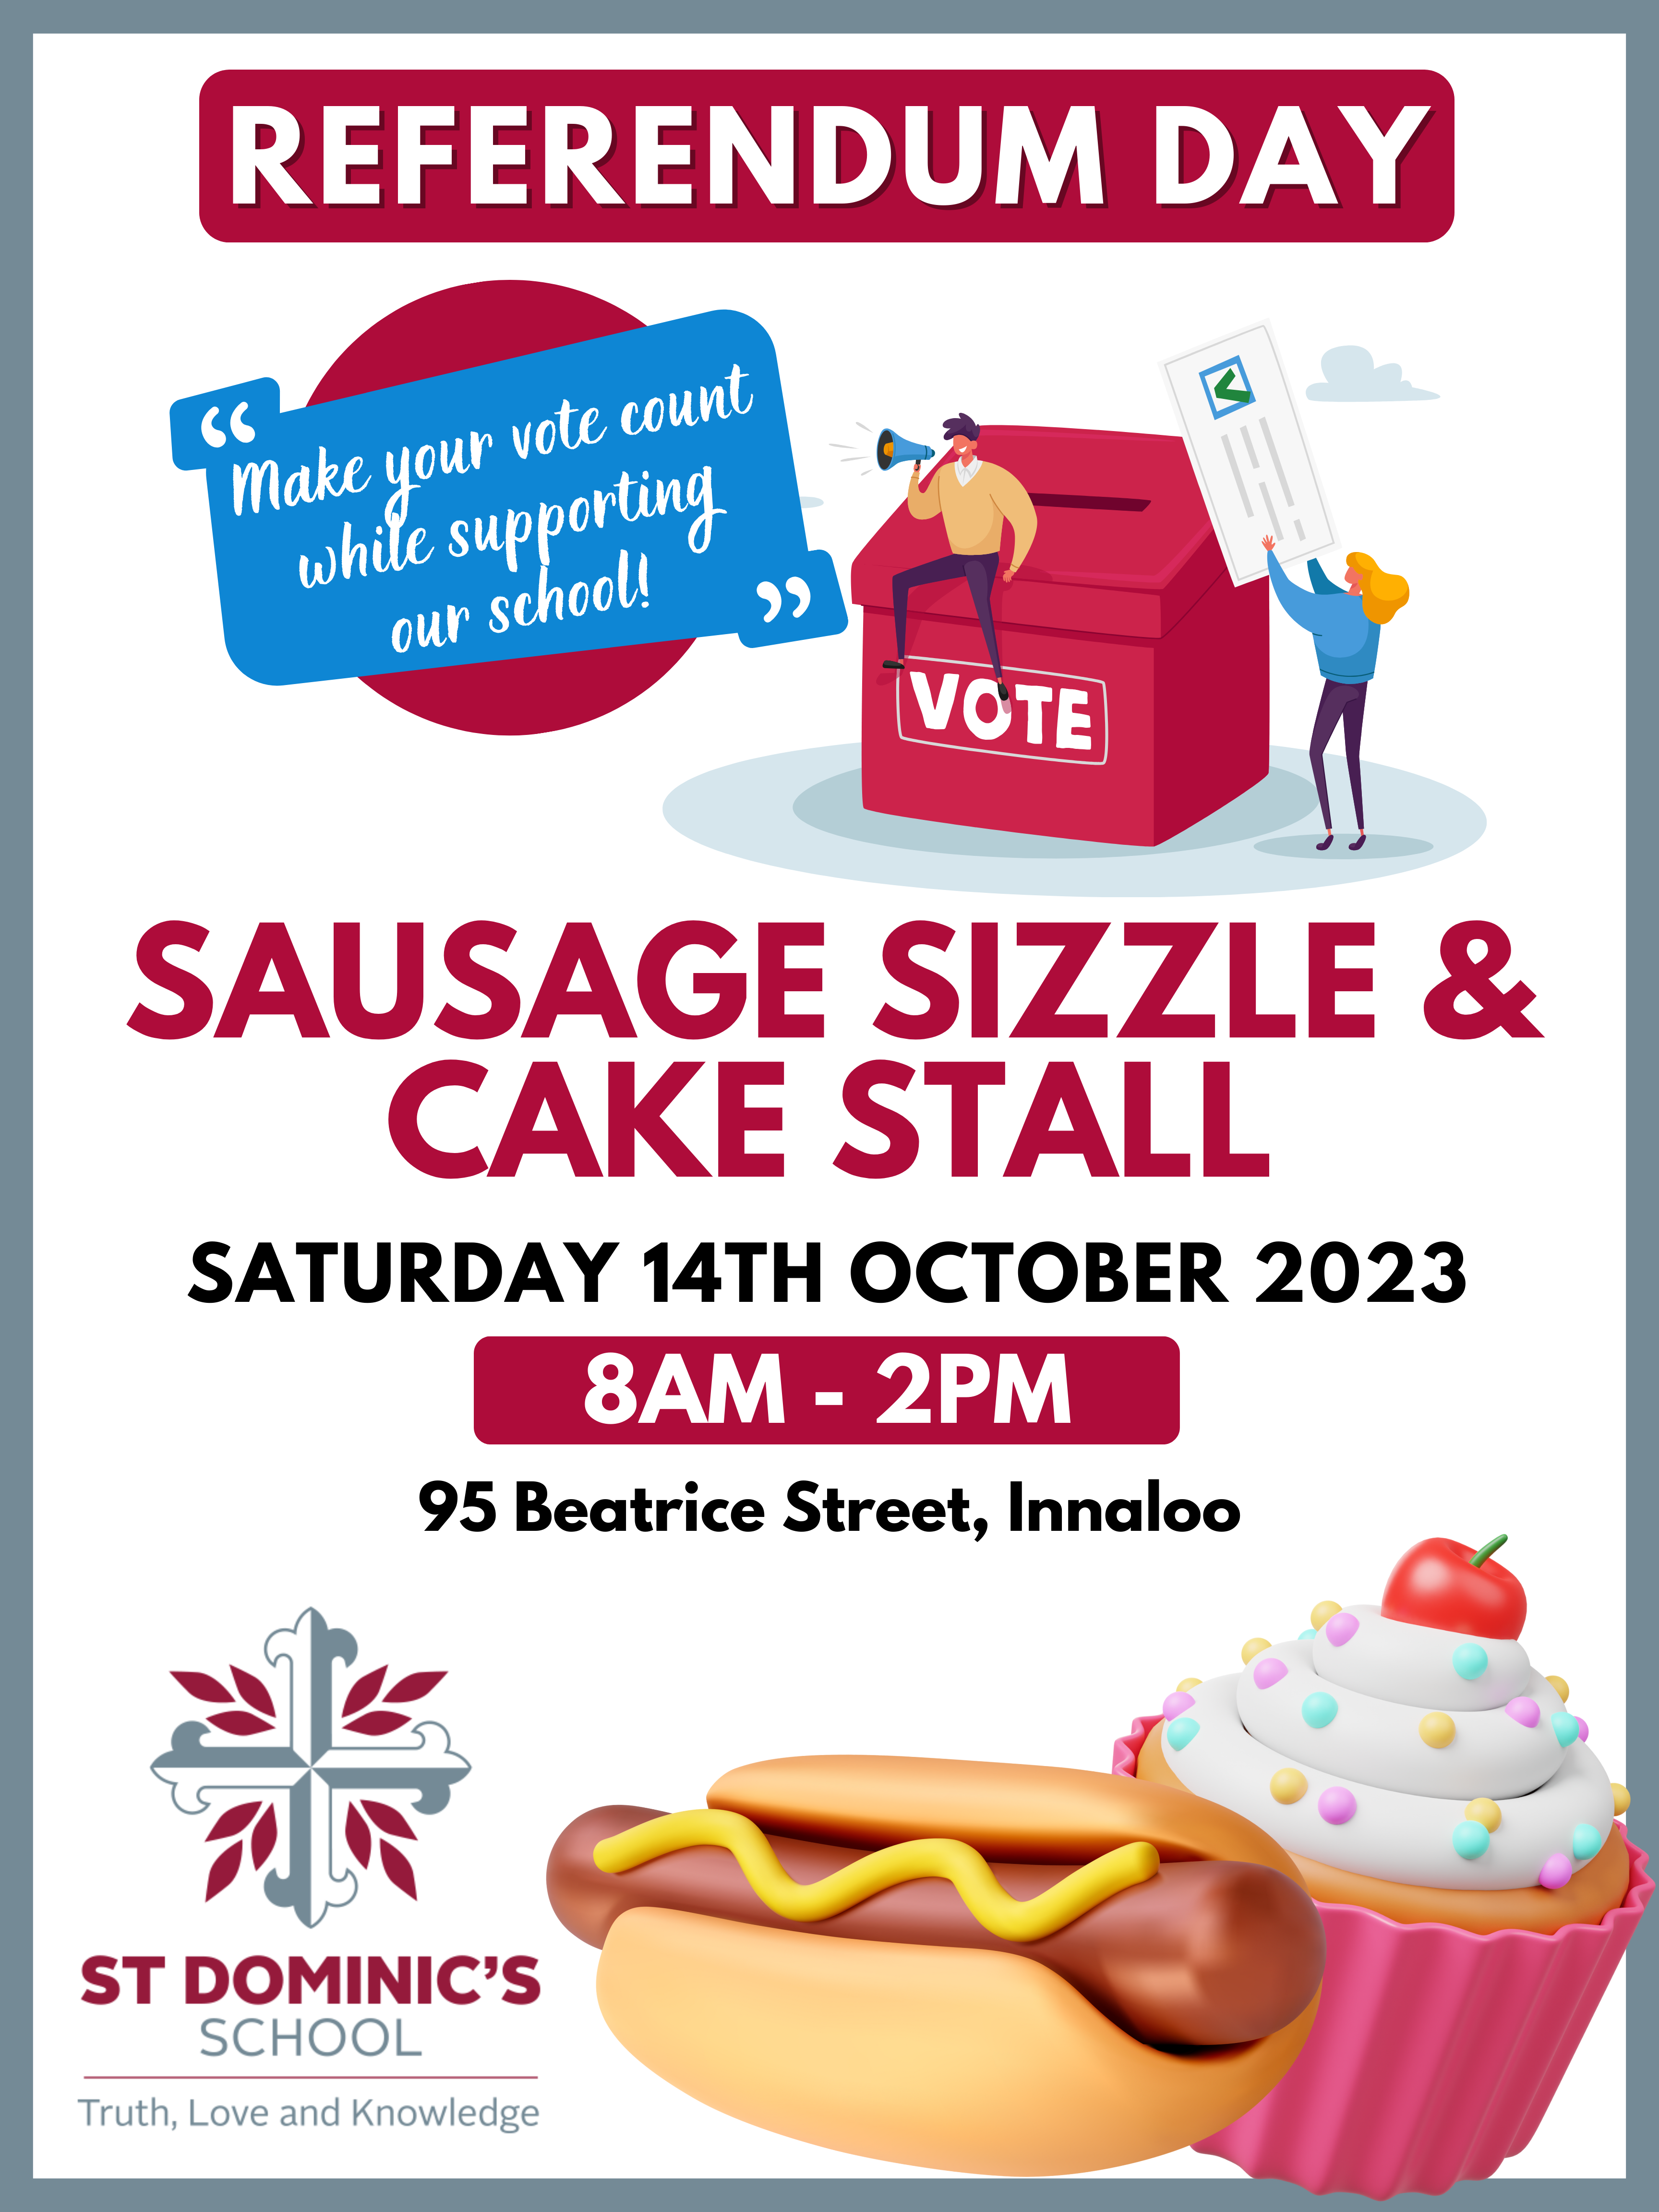 P&F Referendum Day Sausage Sizzle and Cake Stall Details